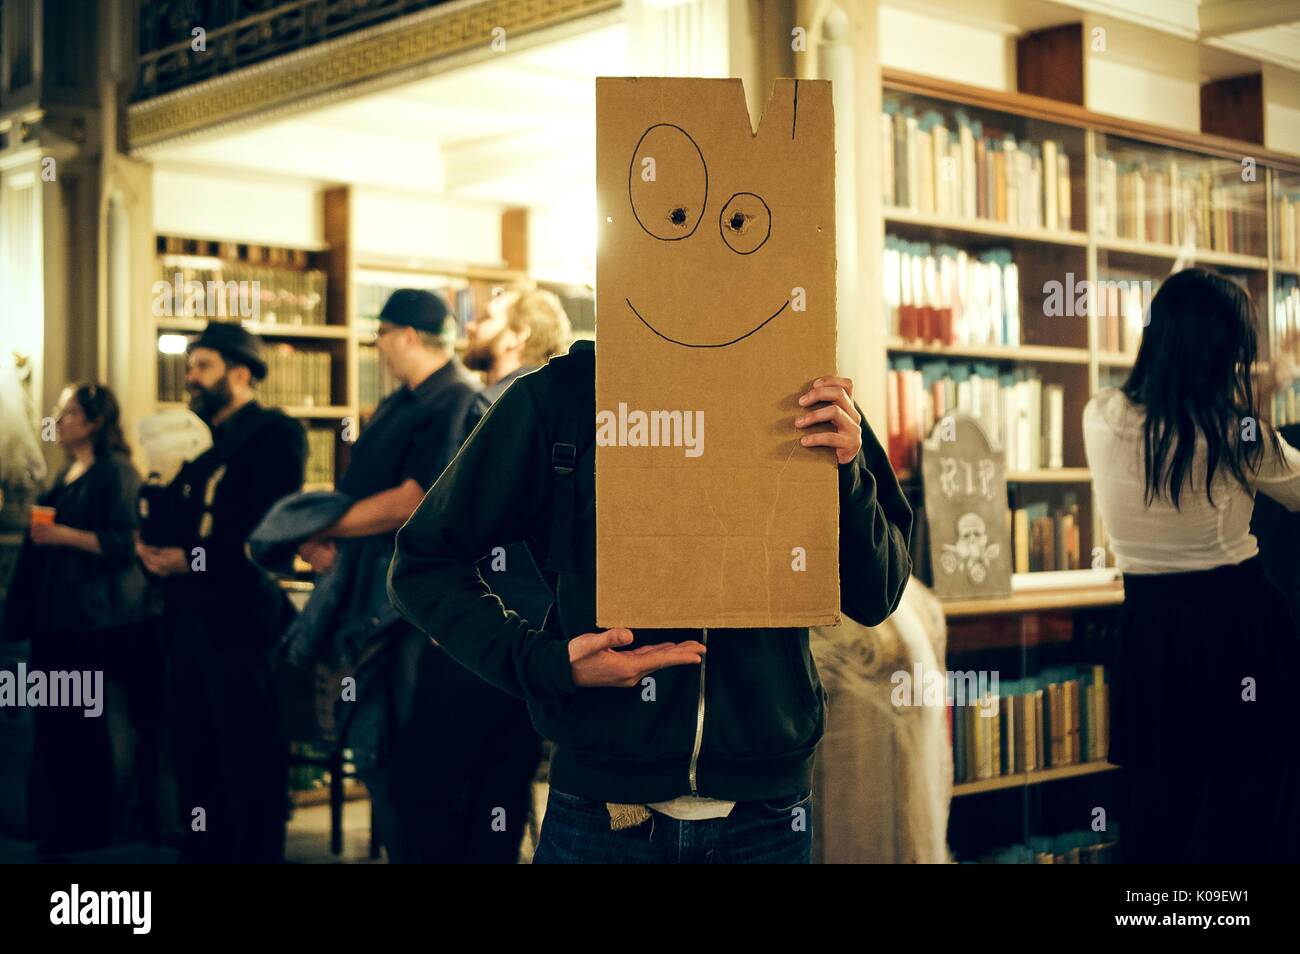 A student shown holding up the Plank from the television show 'Ed, Ed, n Eddy'; party-goers shown in the background with the library stacks, Halloween at Peabody, October 31, 2015. Courtesy Eric Chen. Stock Photo